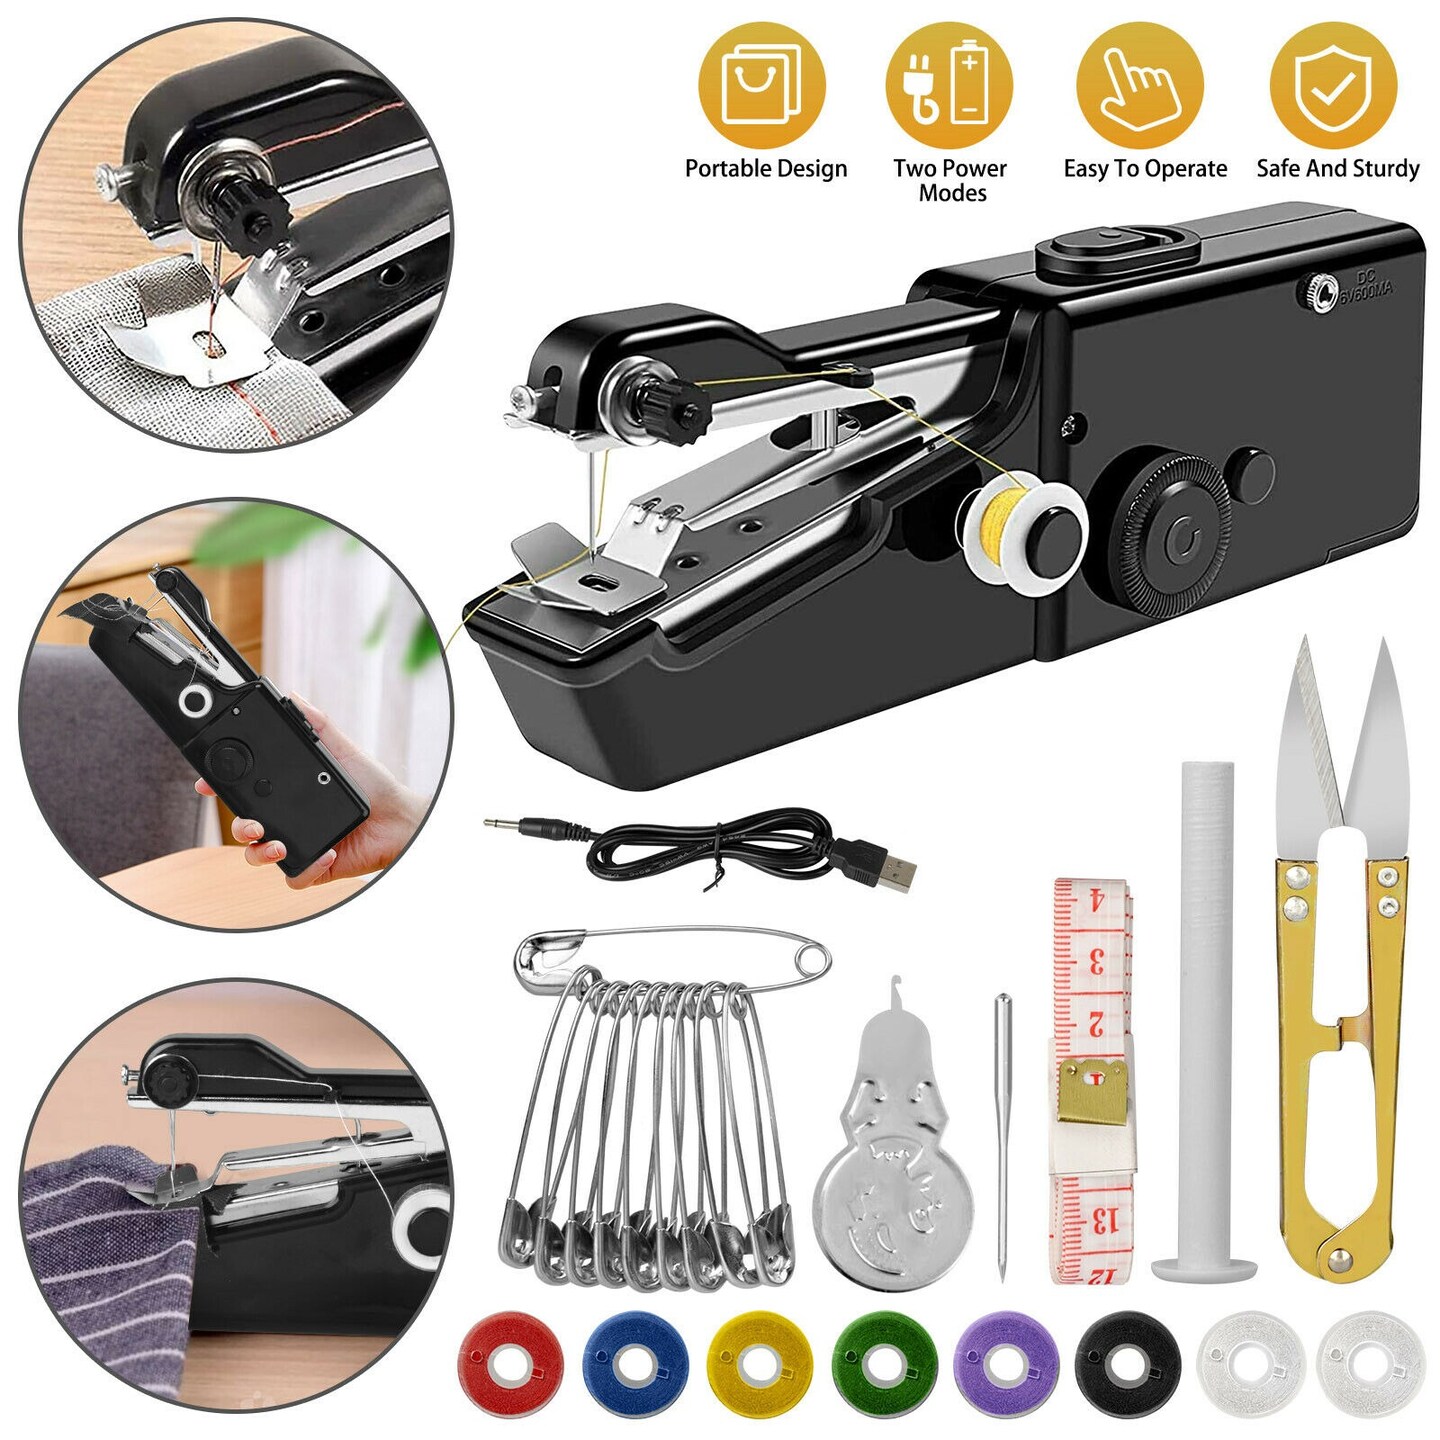 Portable Cordless Mini Sewing Machine for DIY Travel and Home Use